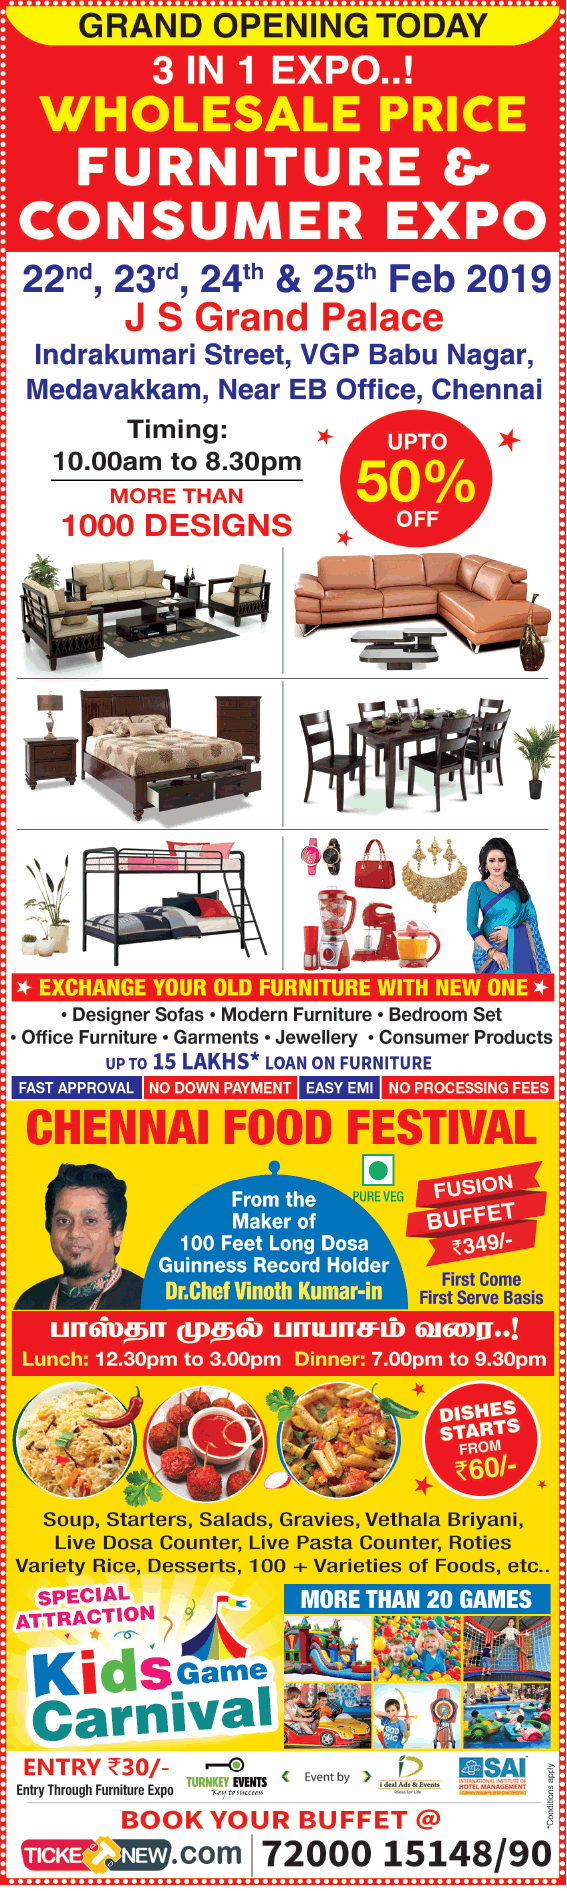 furniture-and-consumer-expo-grand-opening-today-ad-chennai-times-22-02-2019.png